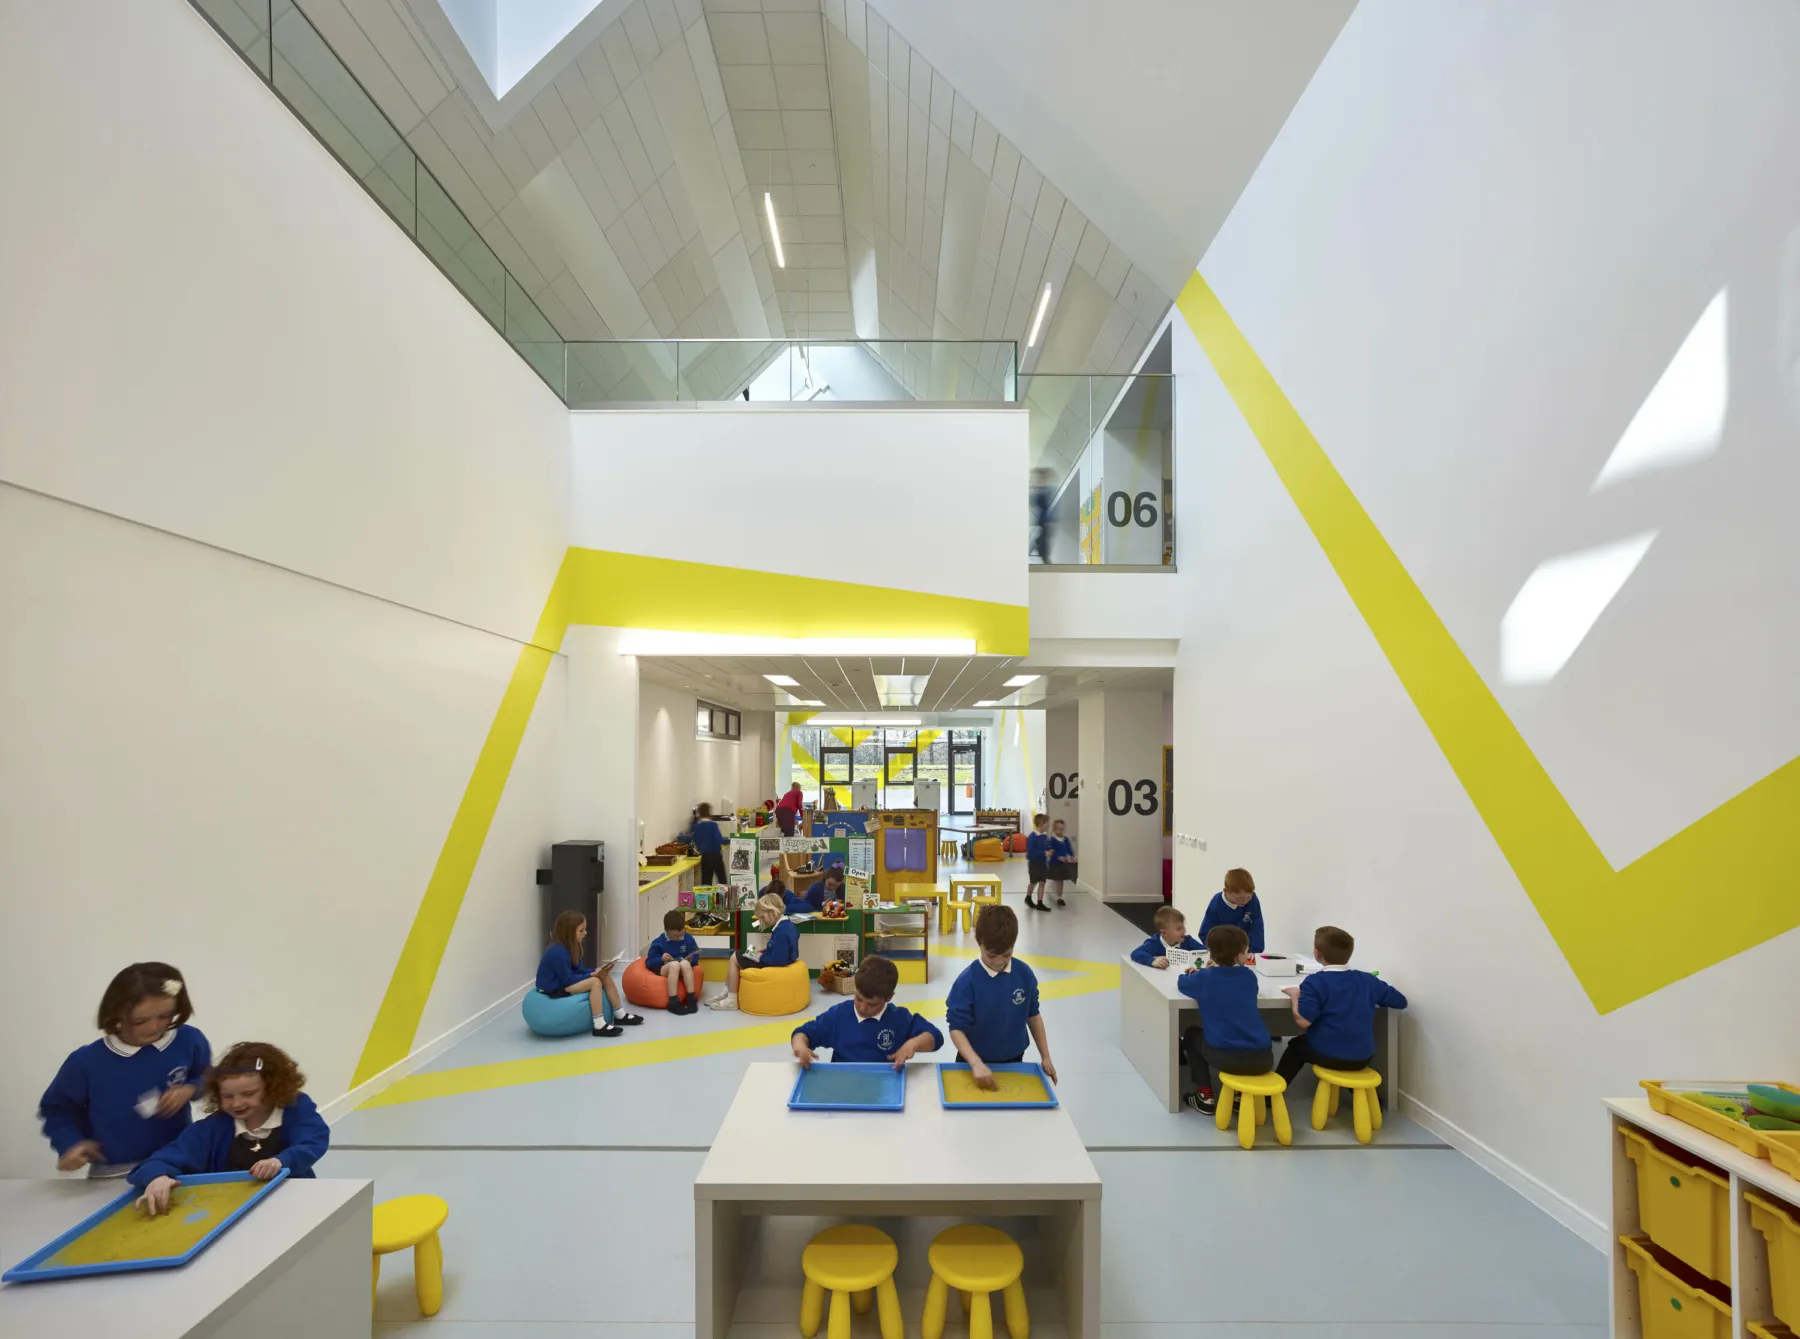 Inside Broomlands Primary School in a double height area with raised crossing. Children sit at tables for activities and in a storytelling area.